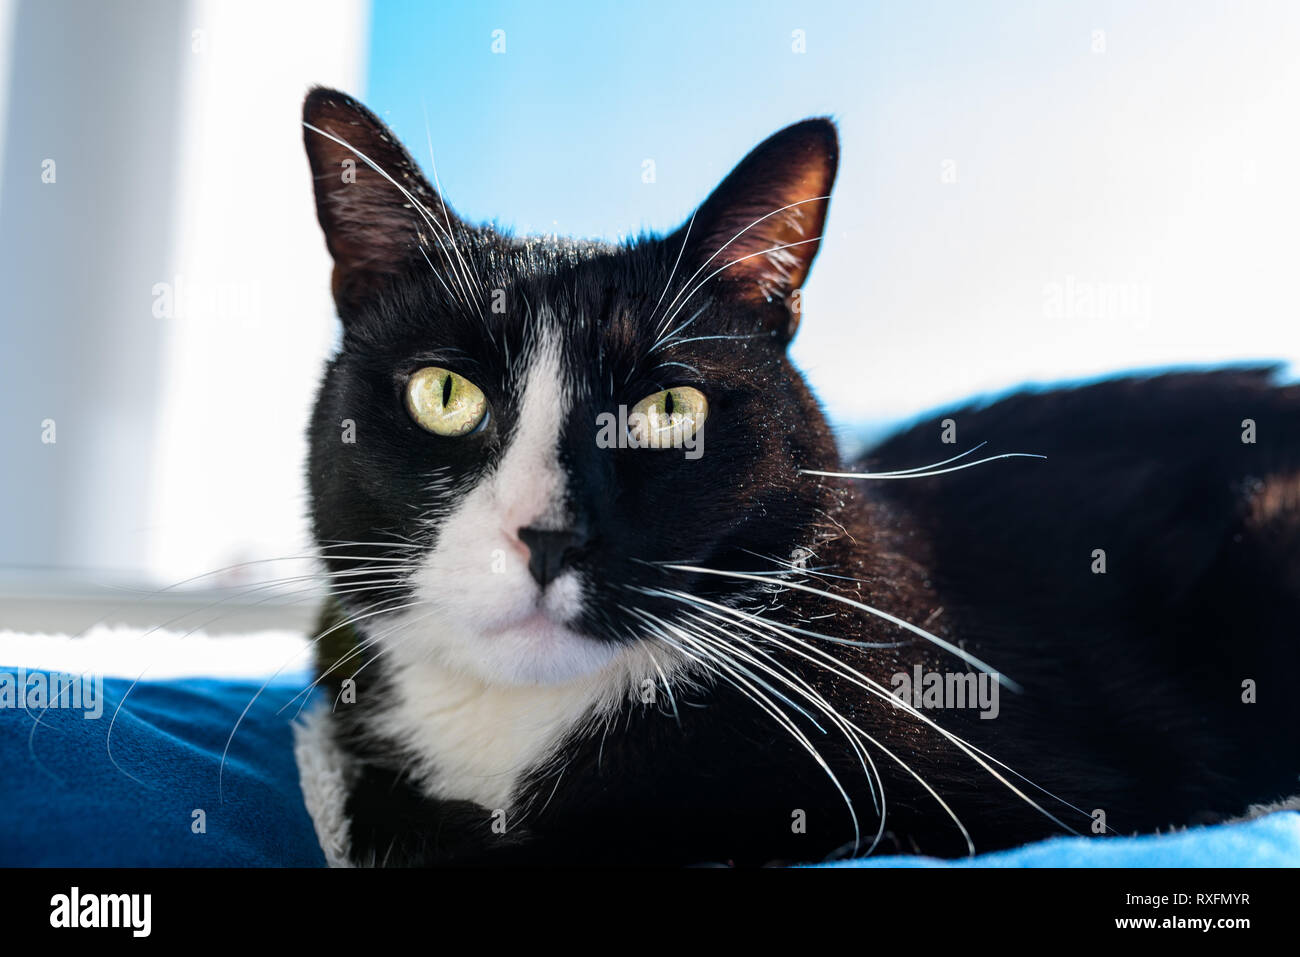 A black cat with a black and white snout, lying on a blue bed on a windowsill, a blue sky in the background. Stock Photo